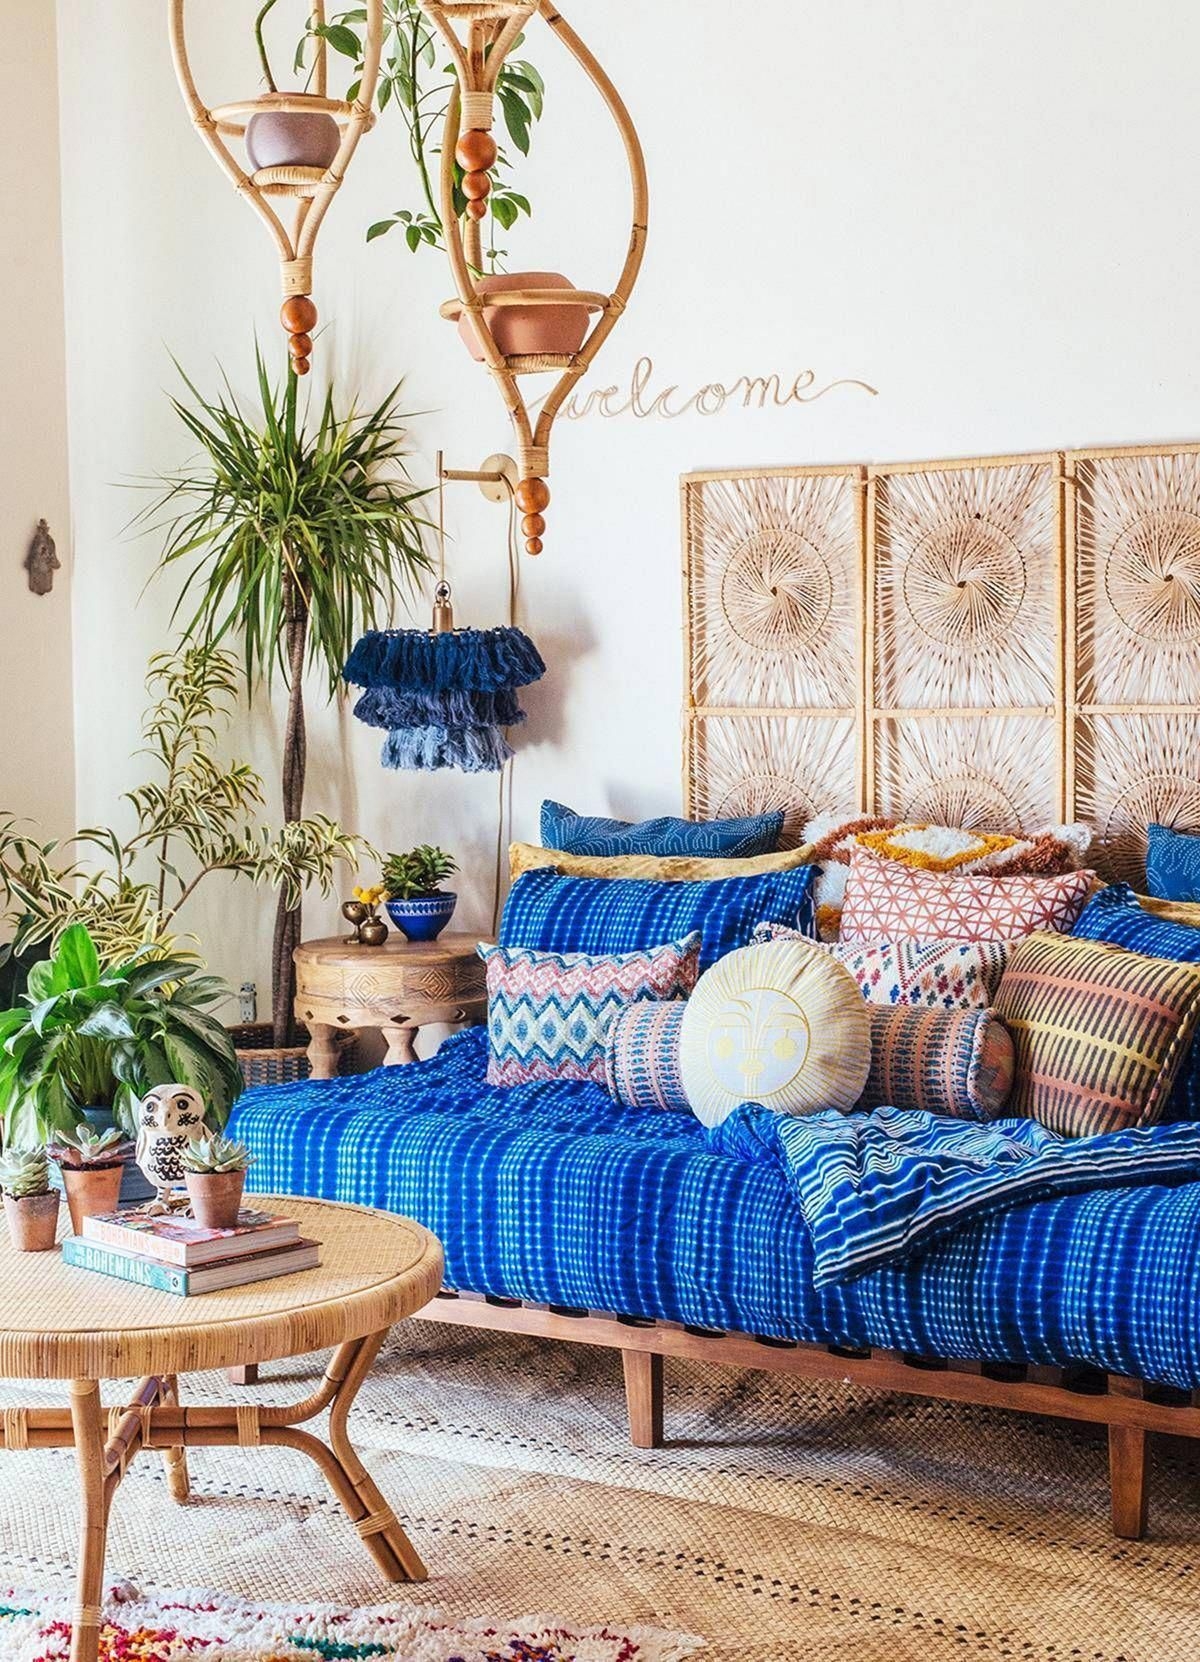 Colorful and Bohemian Living Room Decor